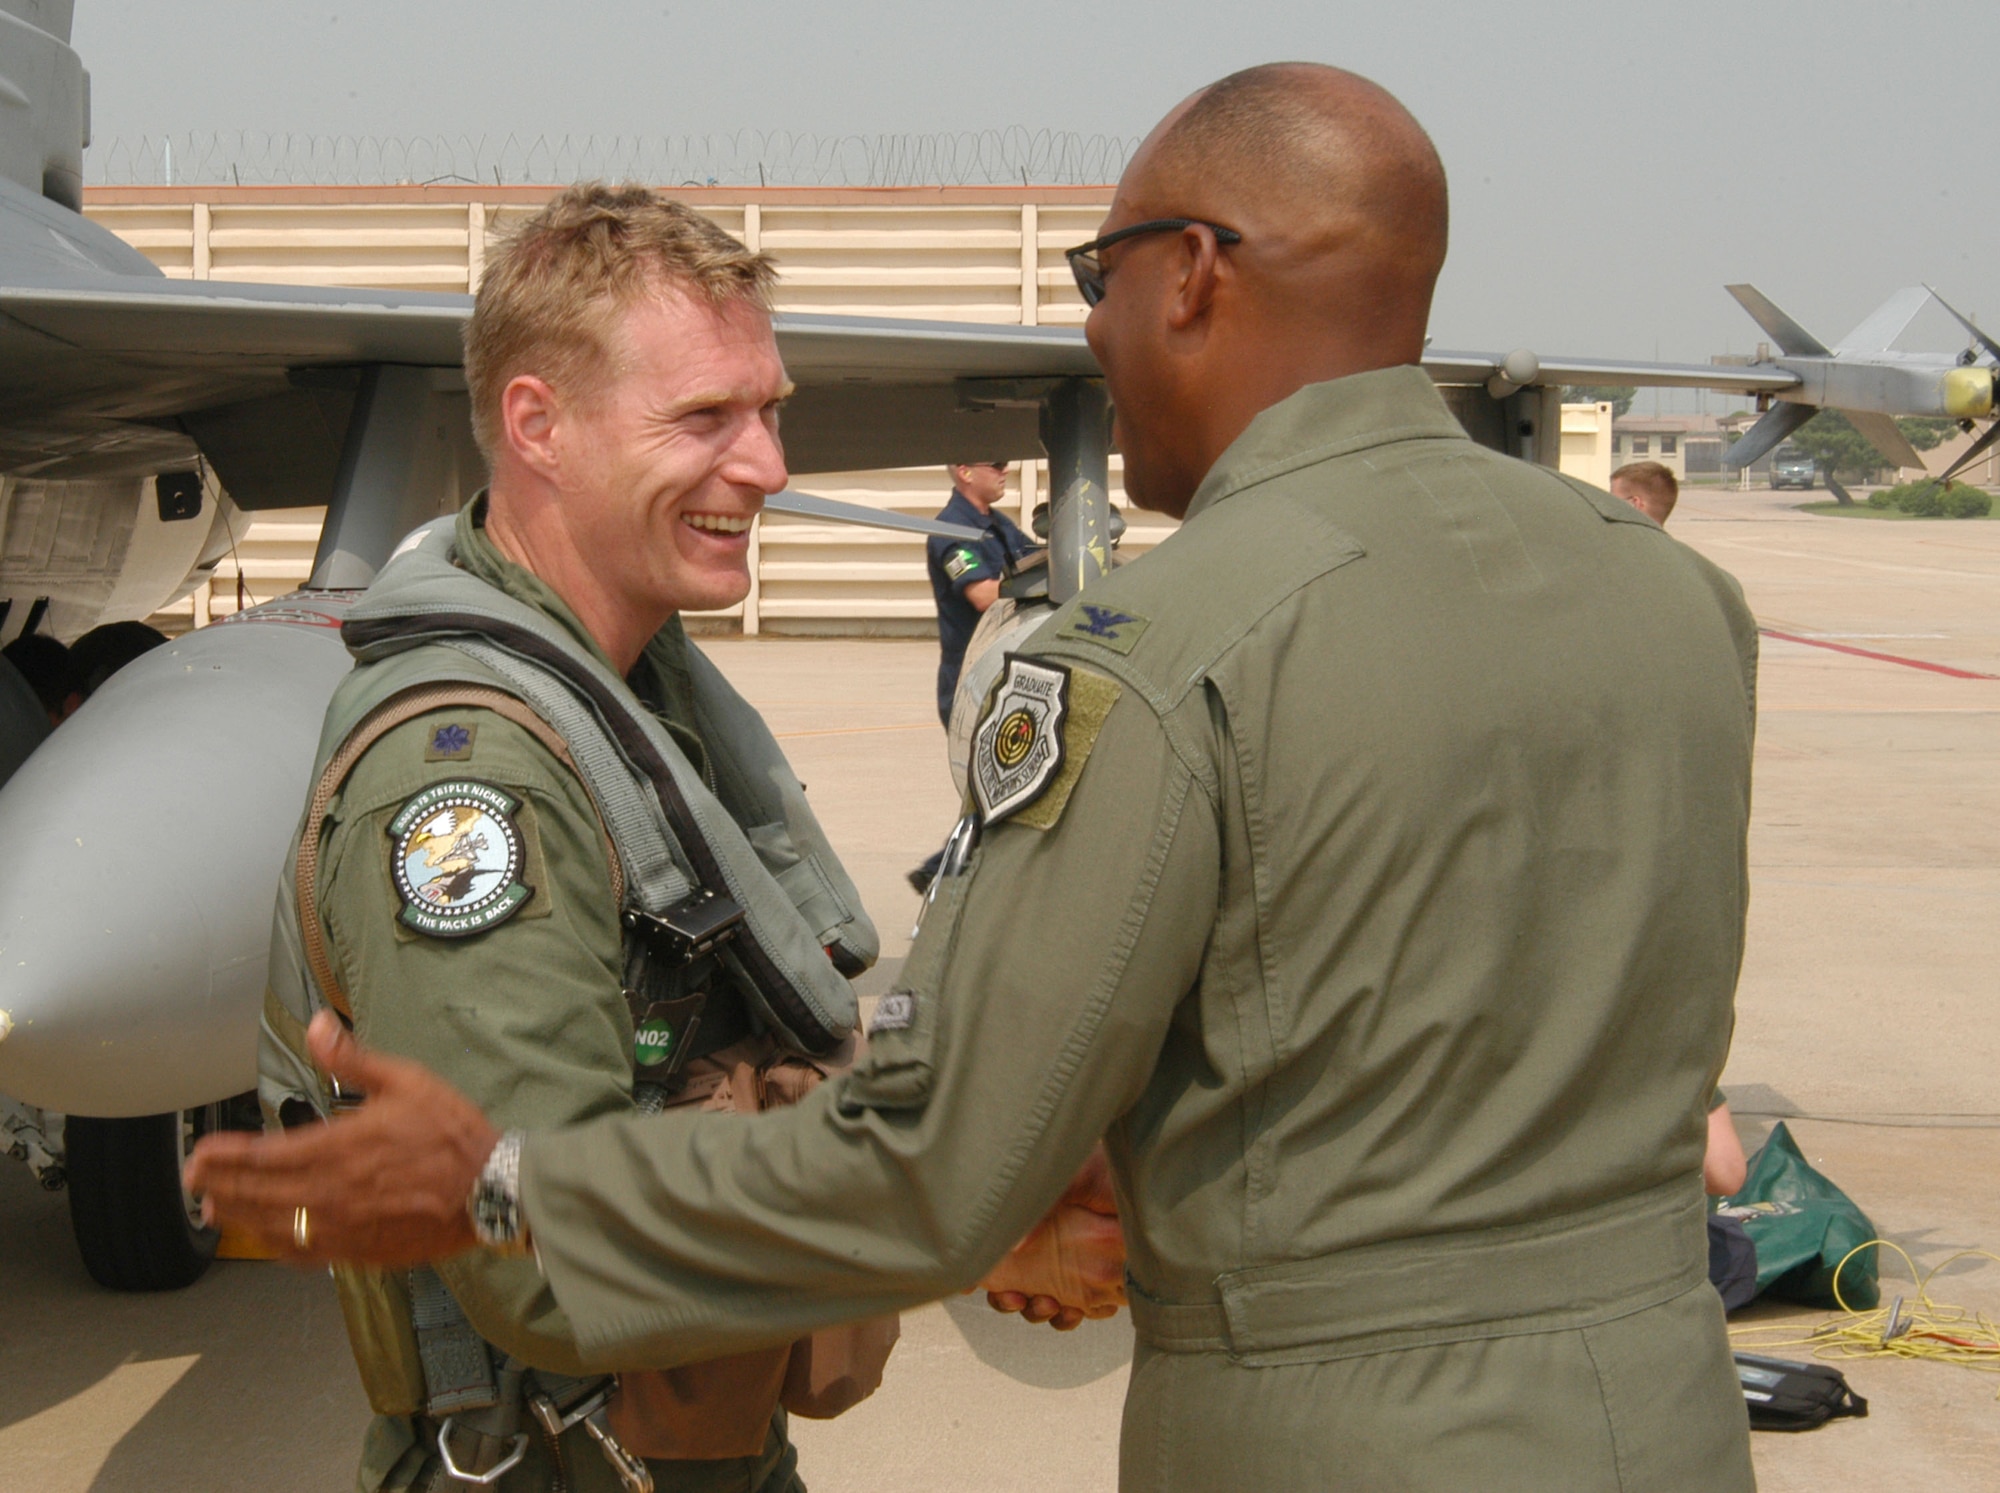 KUNSAN AIR BASE, Republic of Korea -- Lt. Col. Lance Landrum (left), 555th Expeditionary Fighter Squadron "Triple Nickel" pilot, greets Col. CQ "Wolf" Brown after exiting his F-16 Fighting Falcon July 7. Colonel Brown is the 8th Fighter Wing commander. More than 10 aircraft assigned to 555th EFS arrived here from Alaska after being hampered by poor weather conditions. The Triple Nickel is deployed to Kunsan as part of a force posture adjustment in the Northeast Asia region. (U.S. Air Force photo/Senior Airman Stephen Collier)